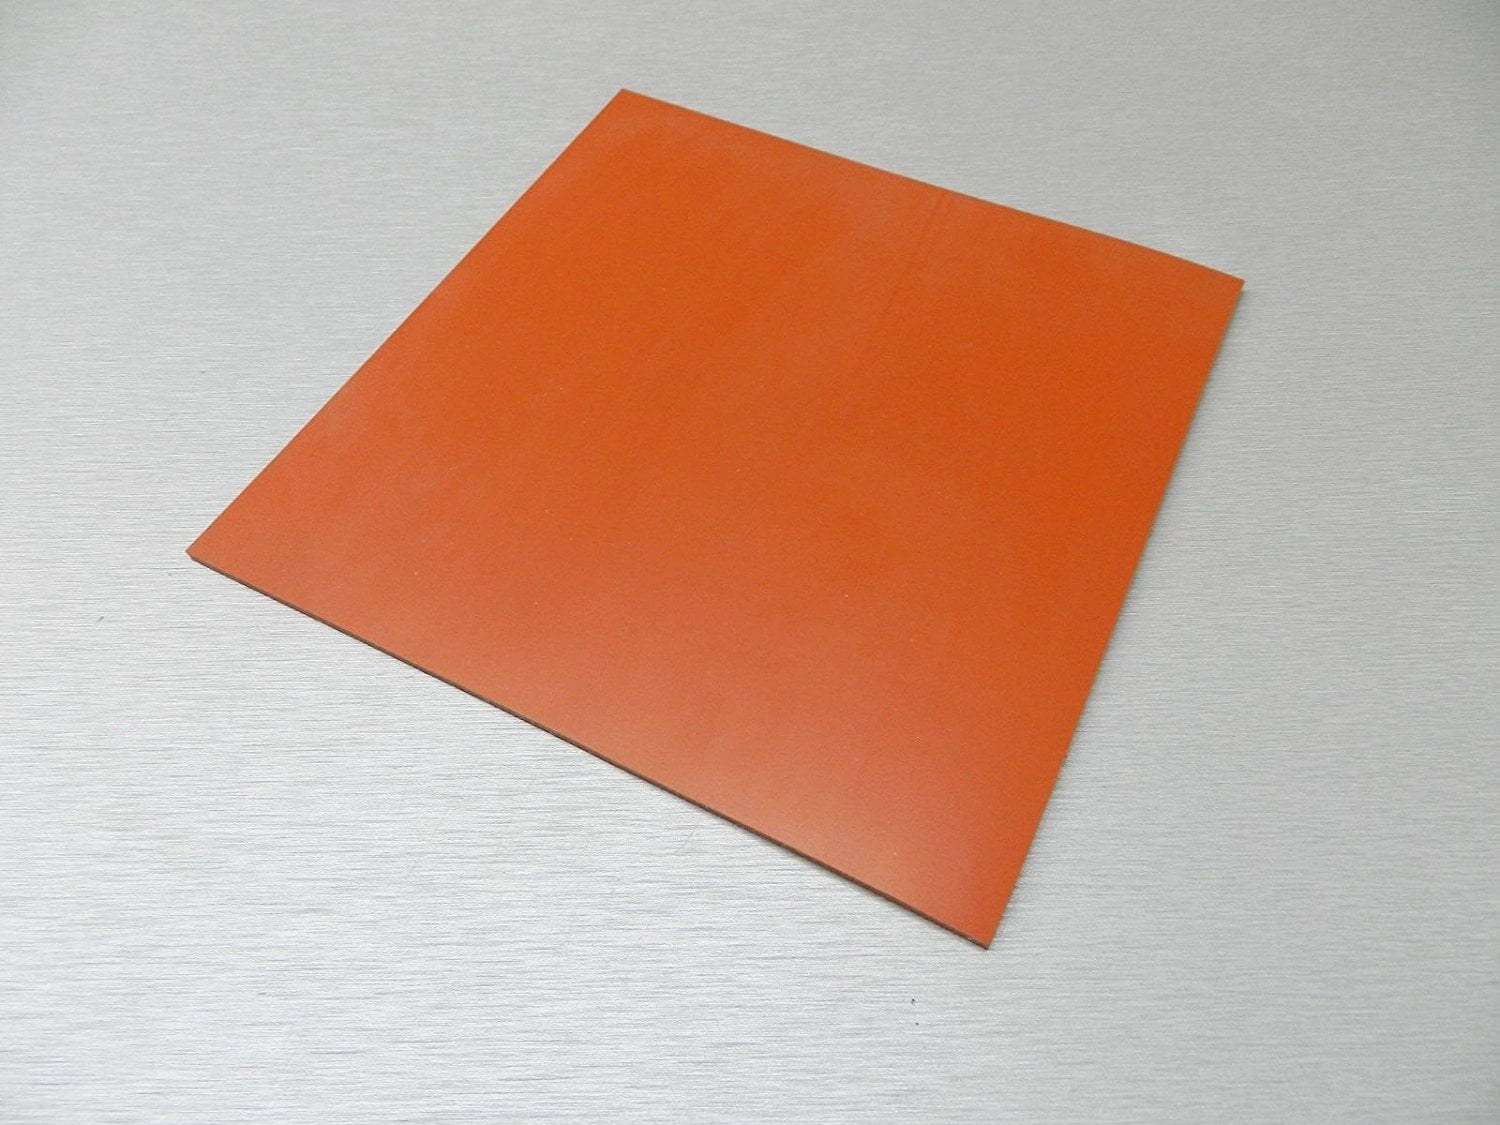 50 durometer High Temp FDA 12" x 12" Red Silicone Rubber Sheet 1/4" thick 